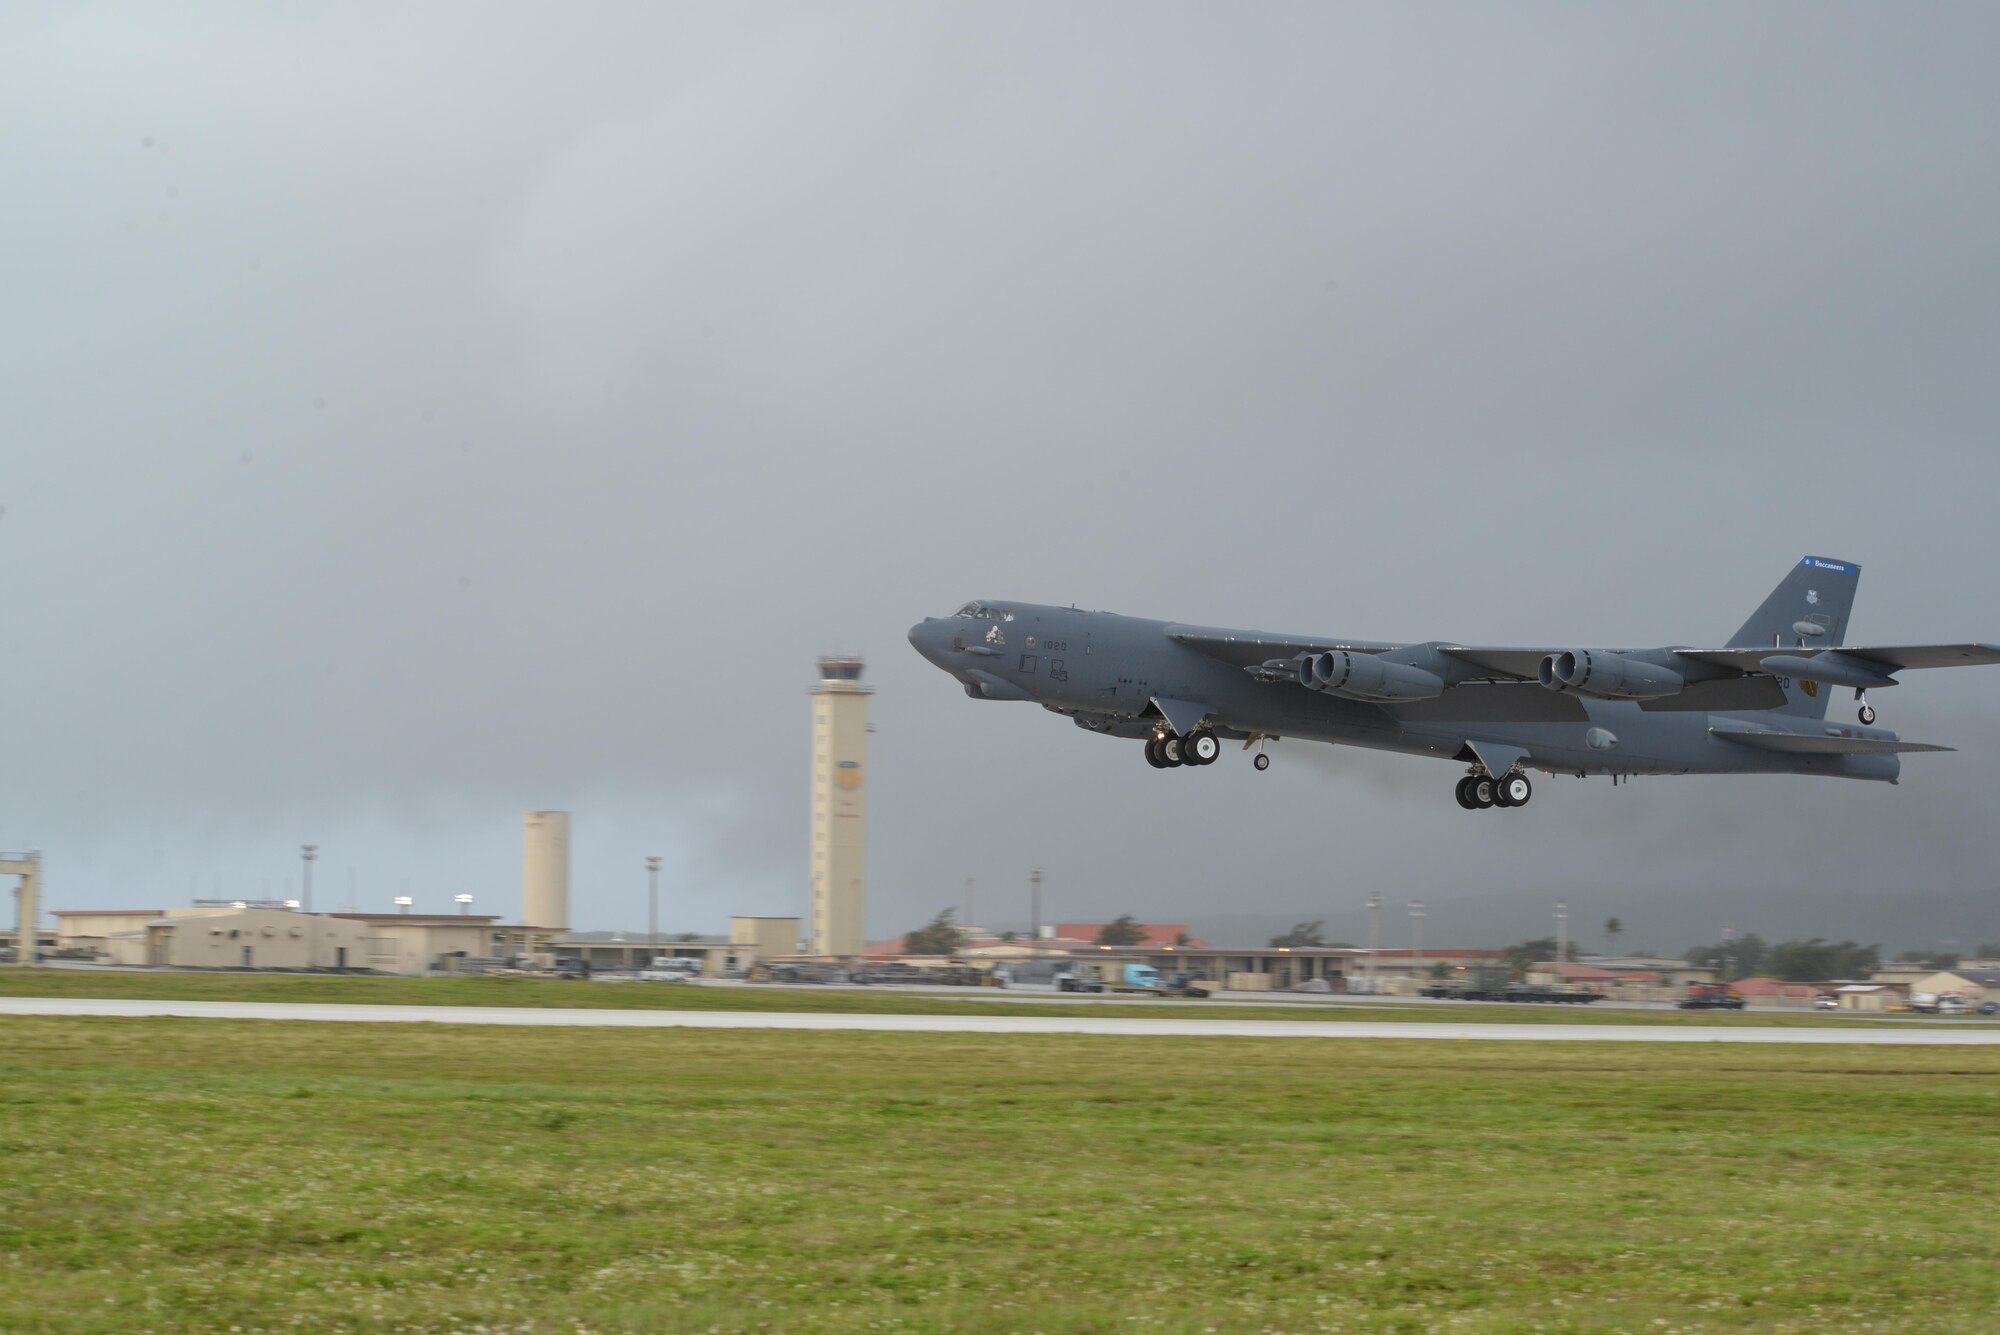 A U.S. Air Force B-52 Stratofortress and accompanying aircrew take off April 23, 2015, at Andersen Air Force Base, Guam. Airmen and Sailors came together Aug. 12, 2015, for a day-long test called “Clutch Shot” with the objective of shooting a missile from two different points and hitting a target simultaneously. A B-52 was used to record data from the test. (U.S. Air Force photo by Senior Airman Amanda Morris/Released)